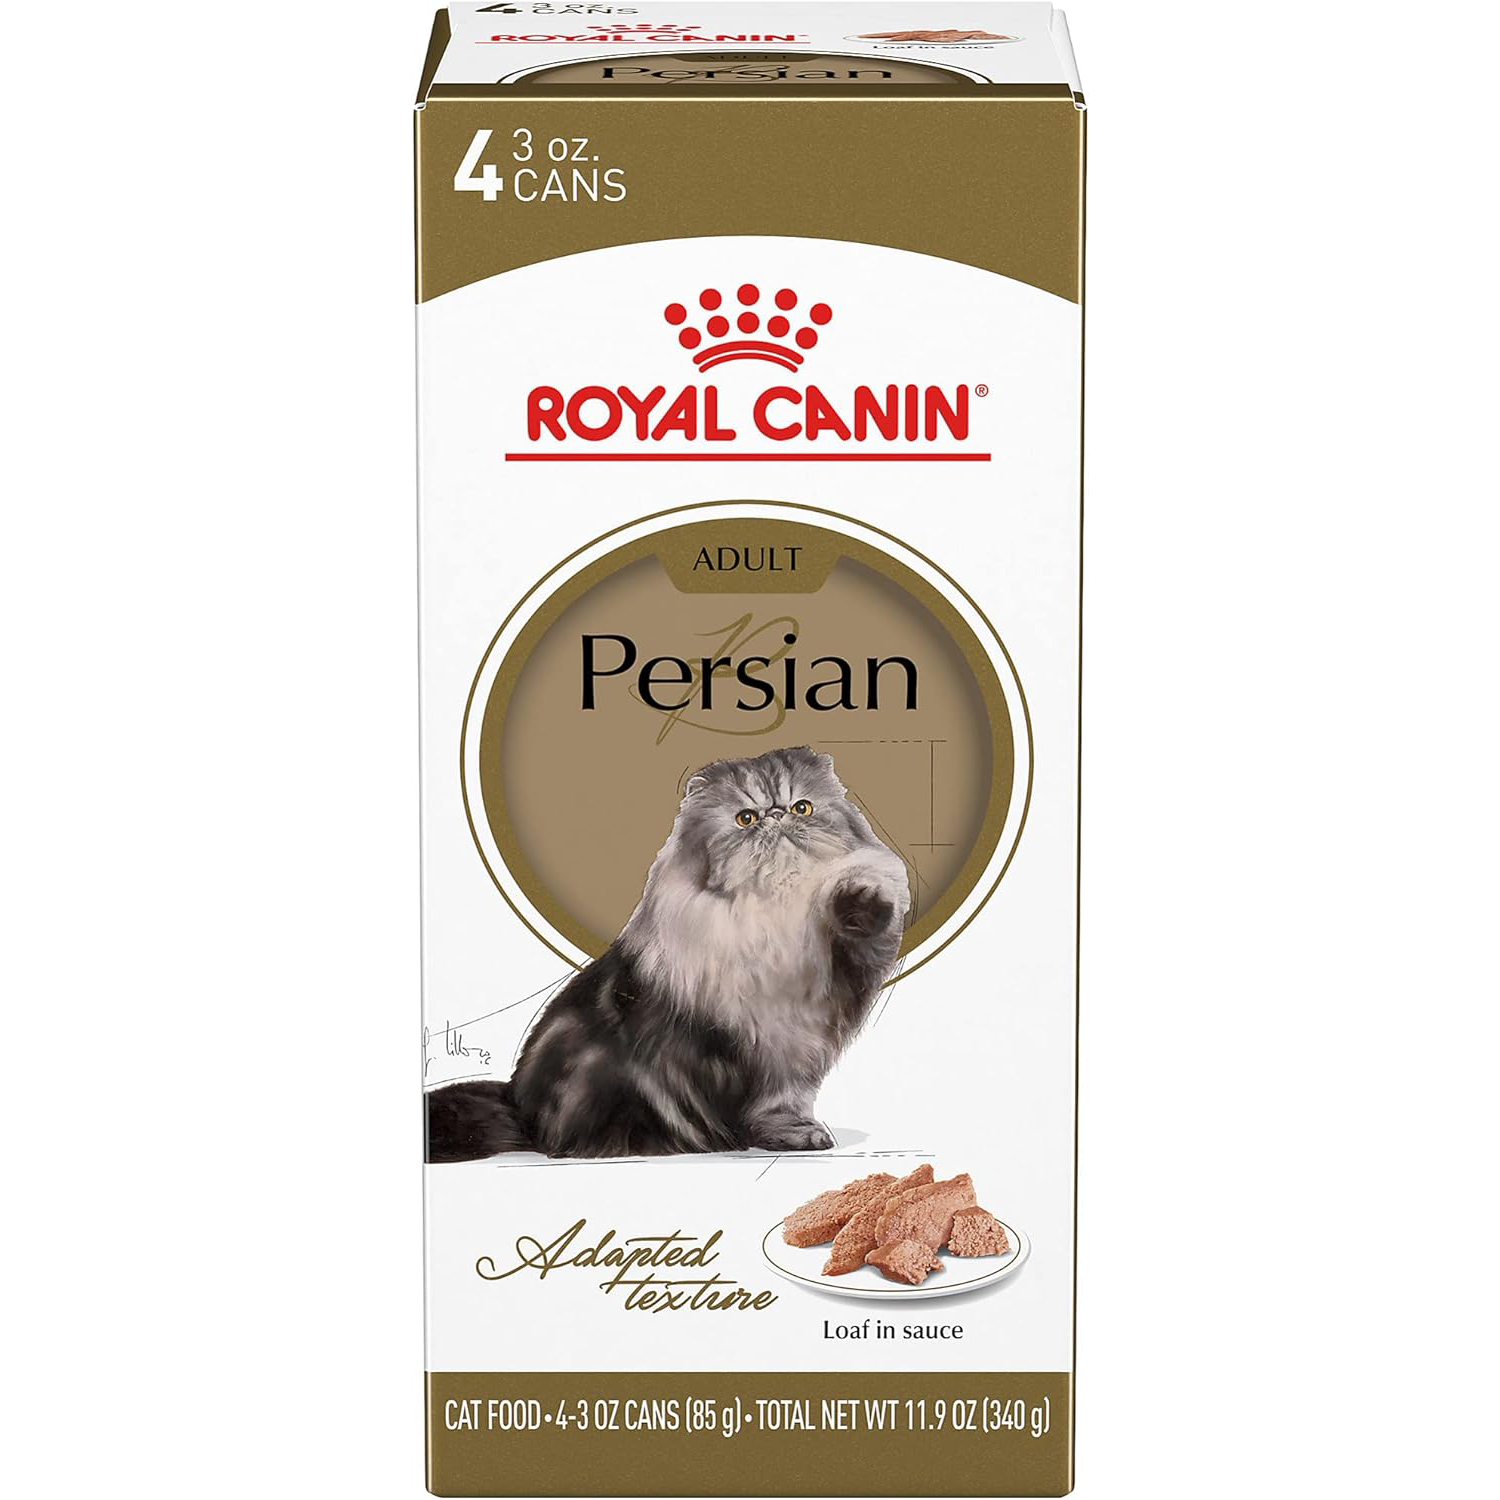 Royal Canin Persian Adult Canned Cat Food